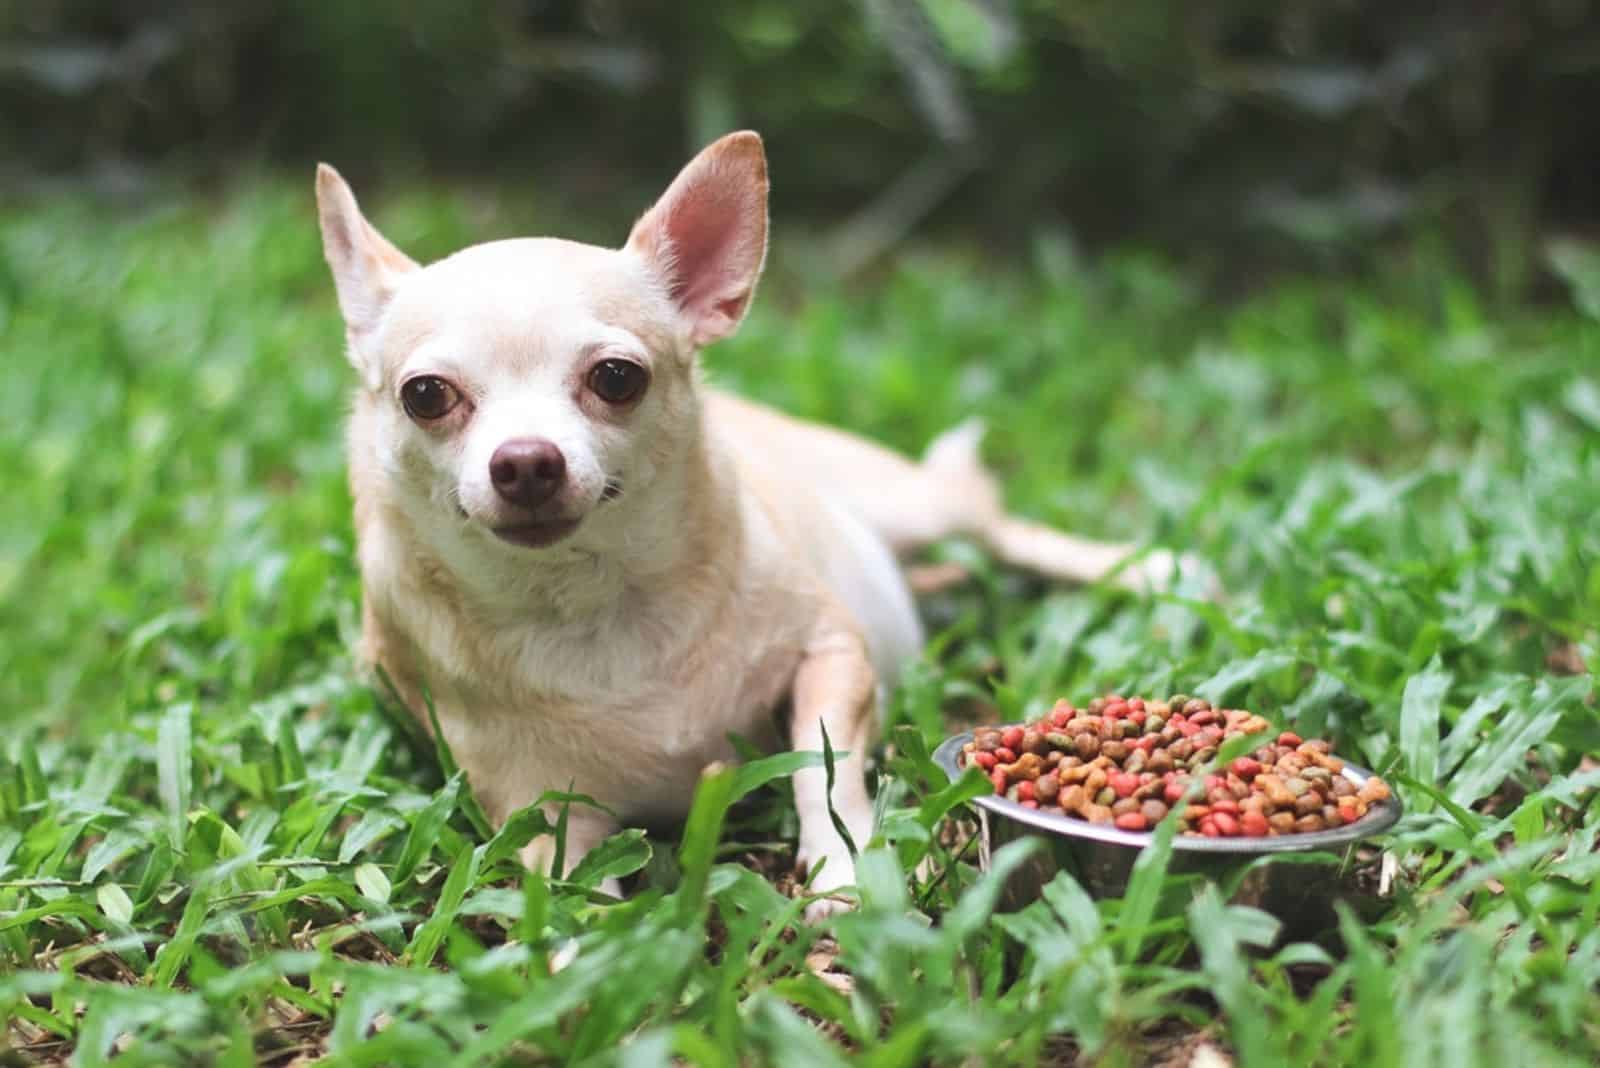 Chihuahua dog lying down on green grass with dog food bowl